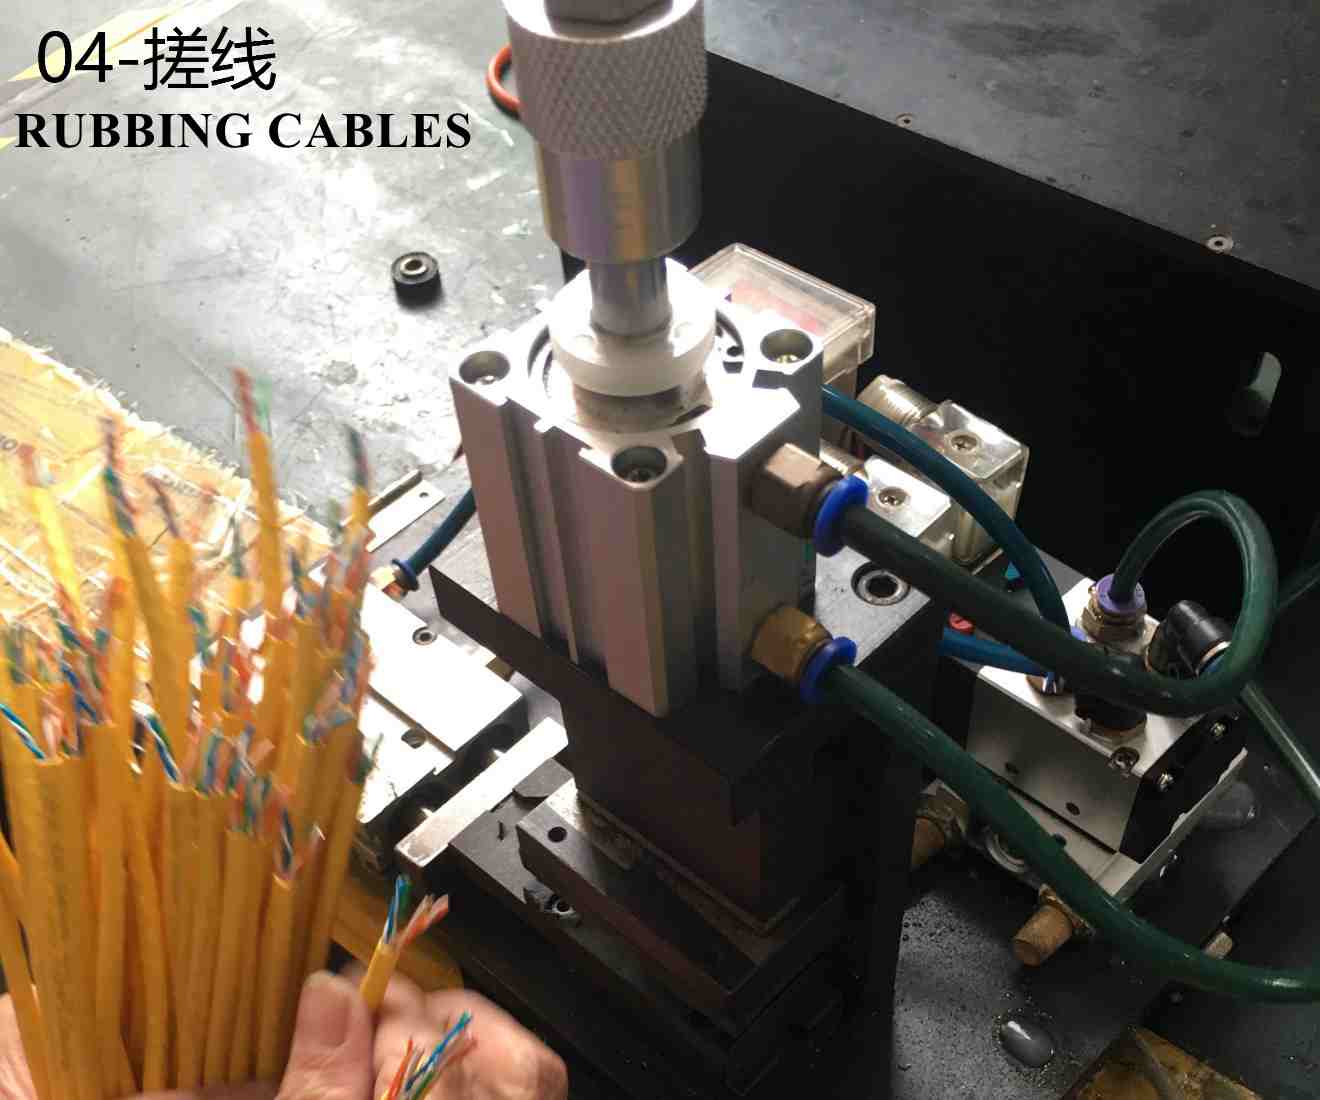 procedure-of-patch-cord-producing-in-factory1.jpg